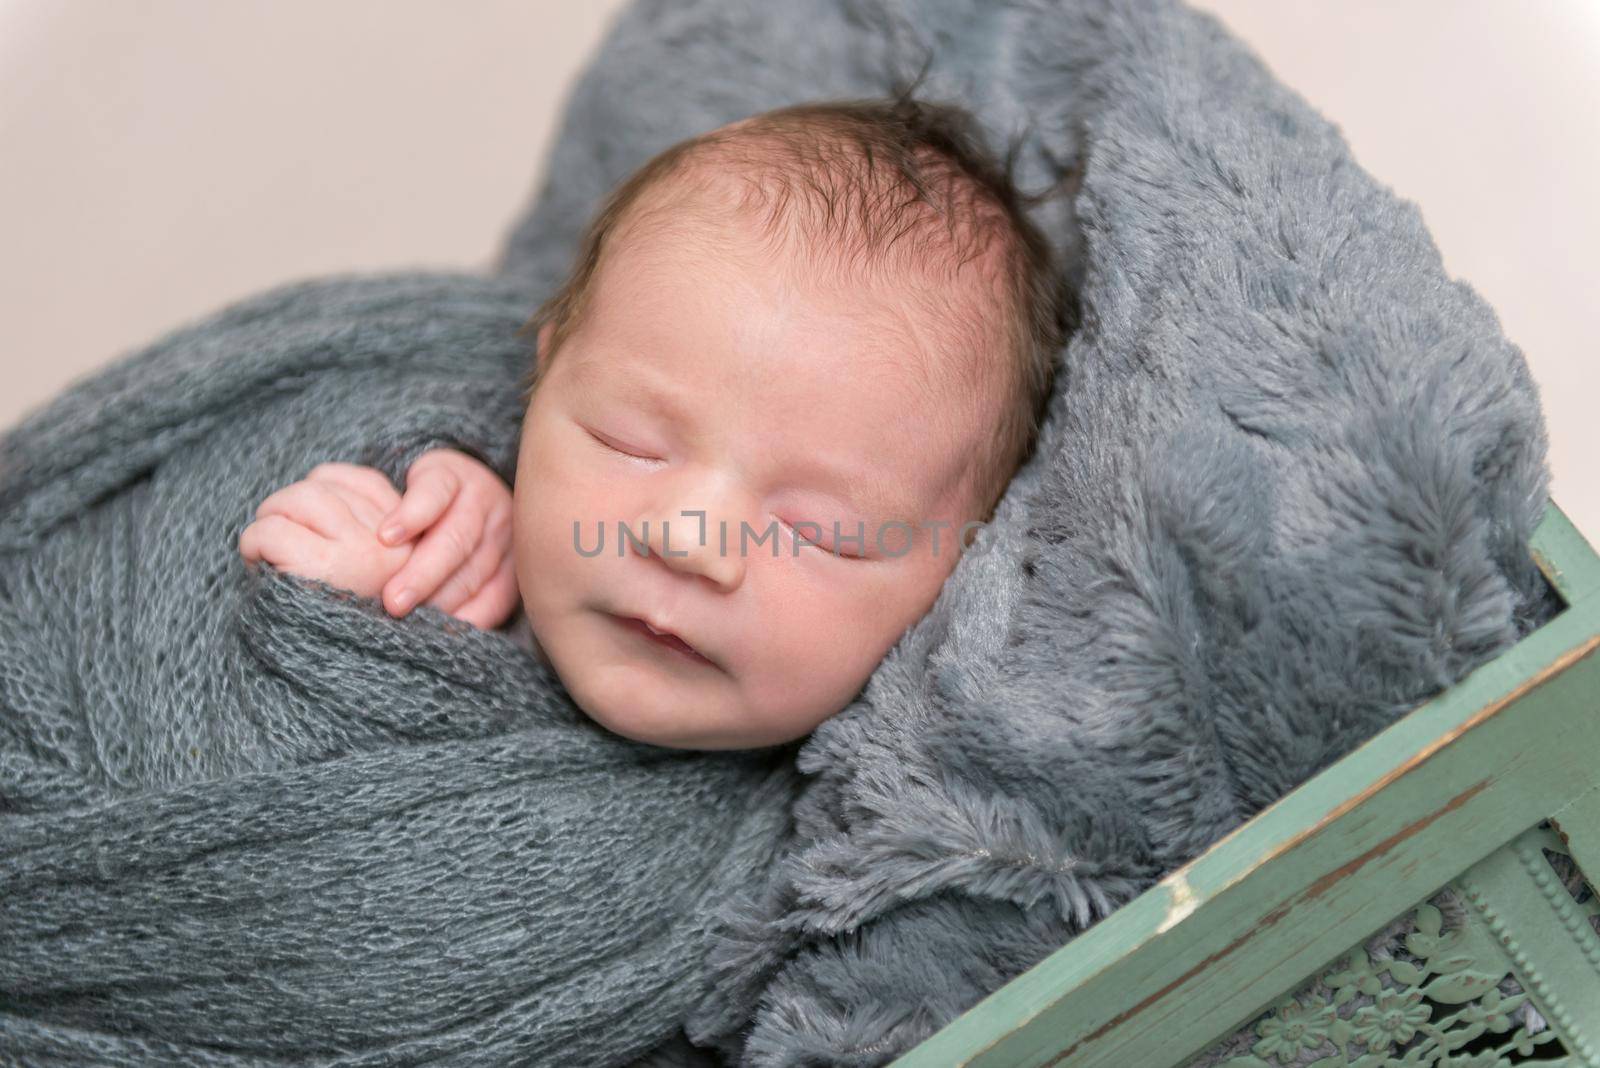 Adorable hairy infant sleeping tight in a basket, all covered with dark gray wrapping, closeup